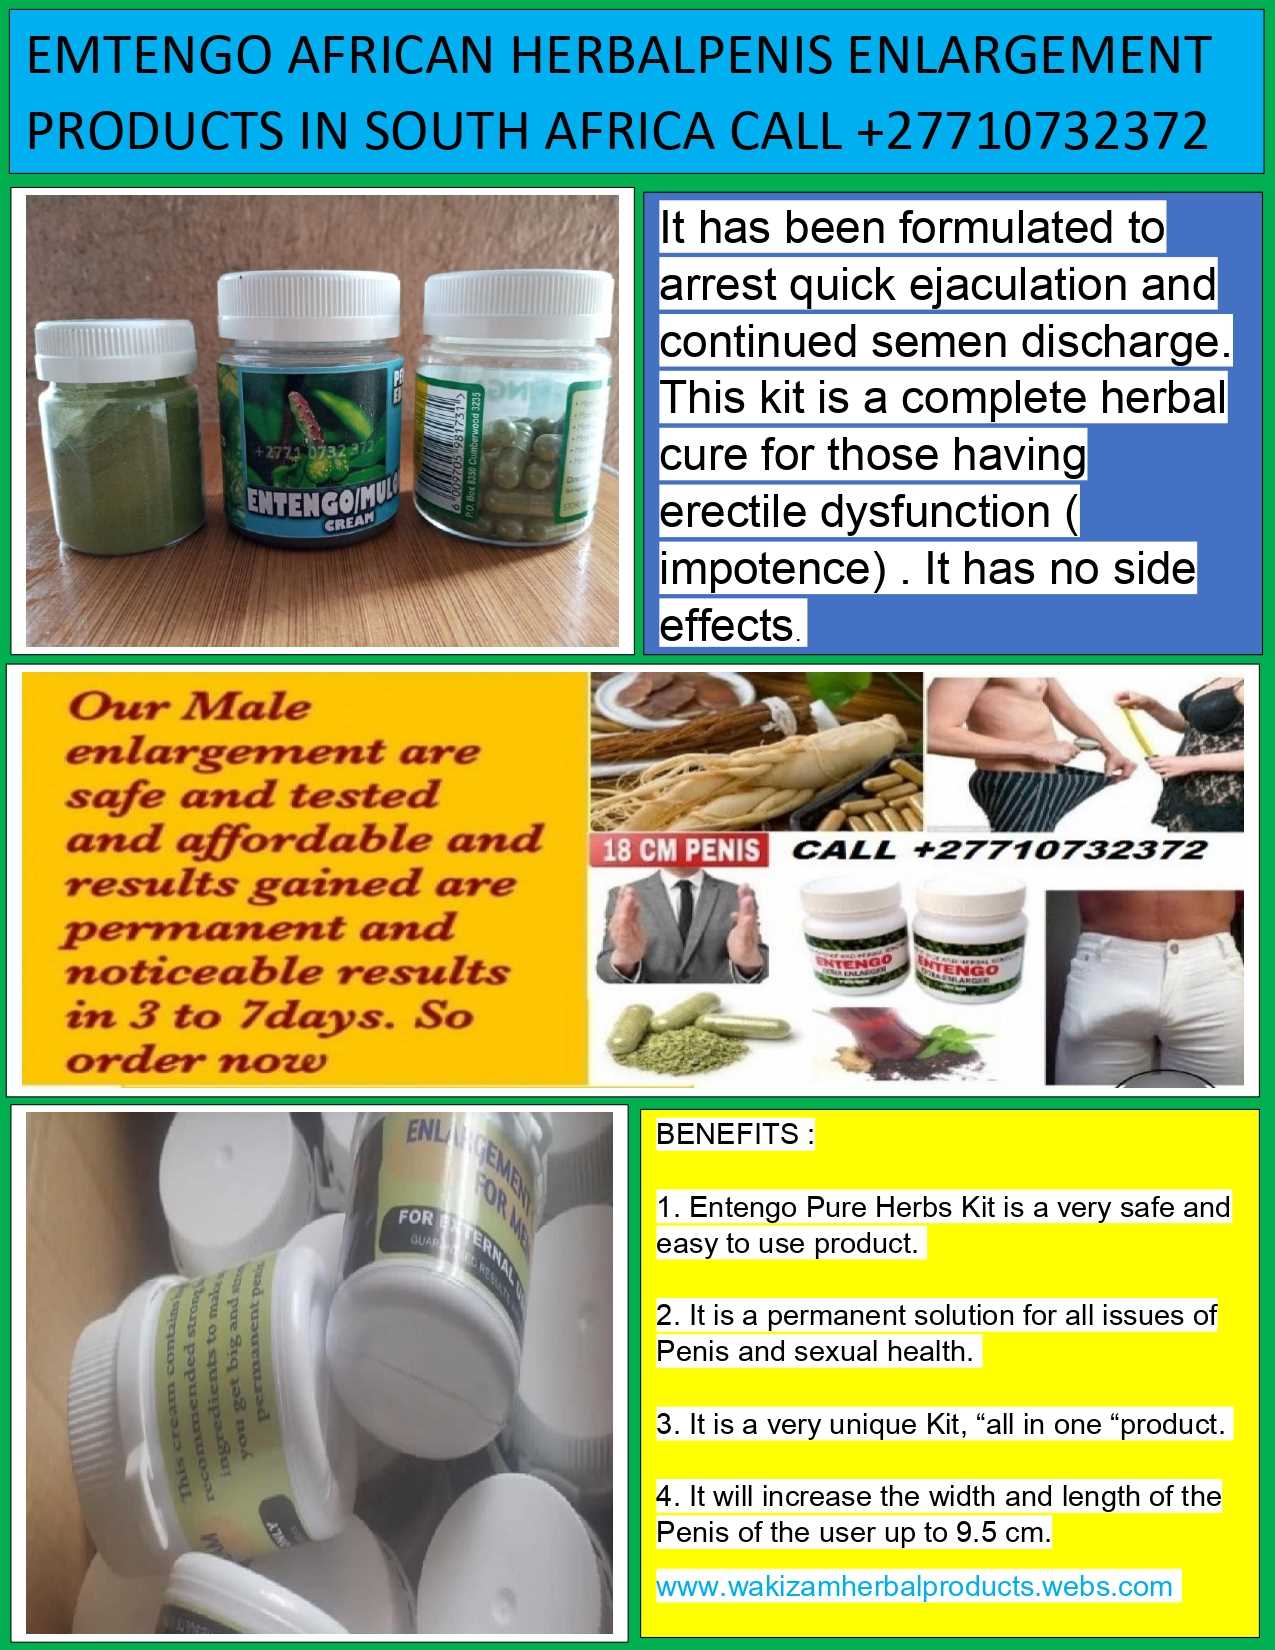 Entengo Combination Of Herbal Products For Penis Growth In Mudgee Town in Australia And Empangeni City In South Africa Call ✆ +27710732372 Penis Enlargement In Berlin City In Germany And Semarapura Town on Bali, Indonesia